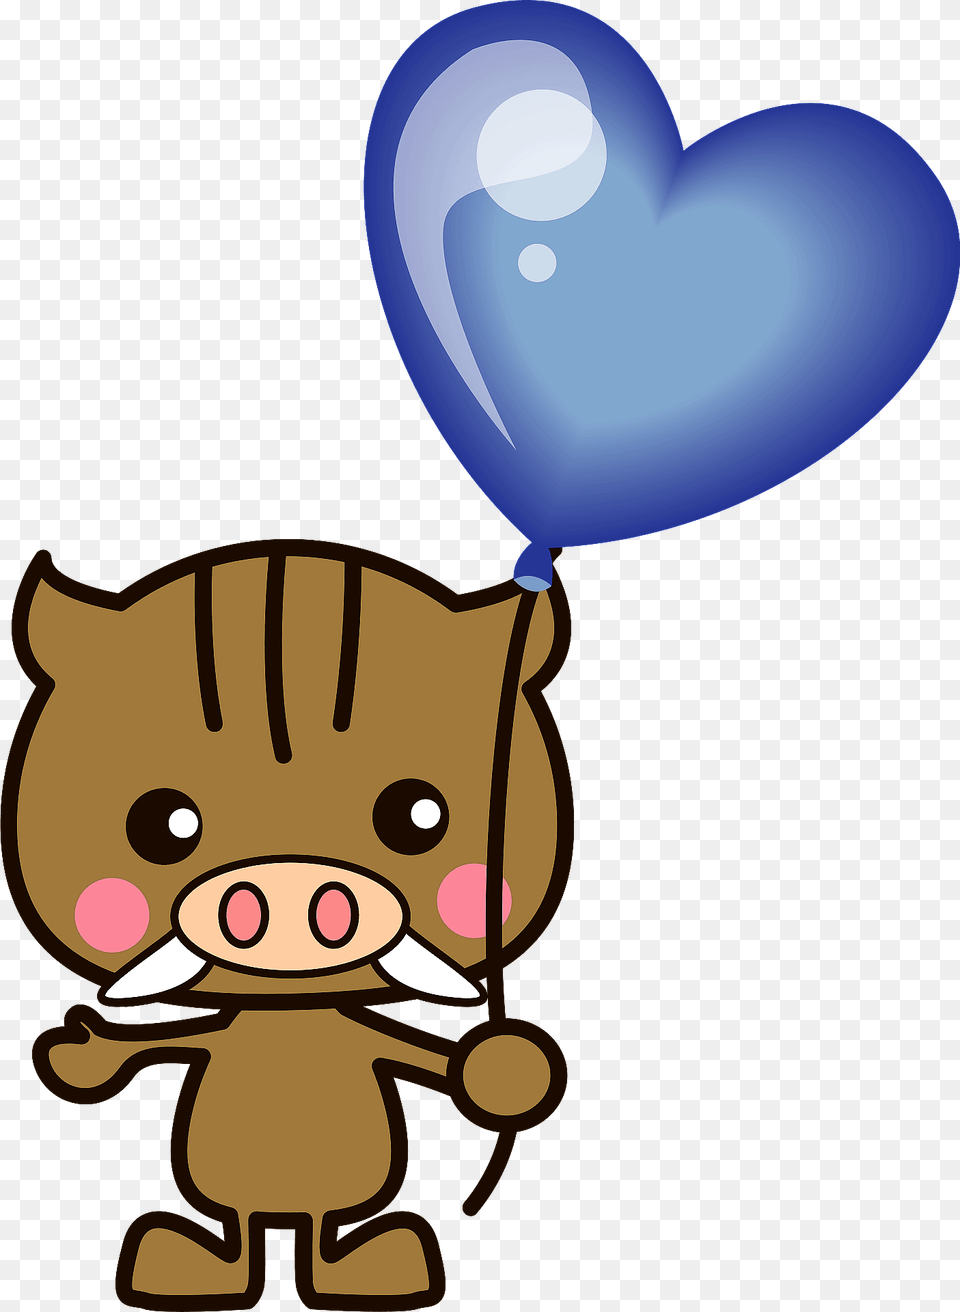 Wild Boar Is Holding A Blue Heart Balloon Clipart Free Transparent Png